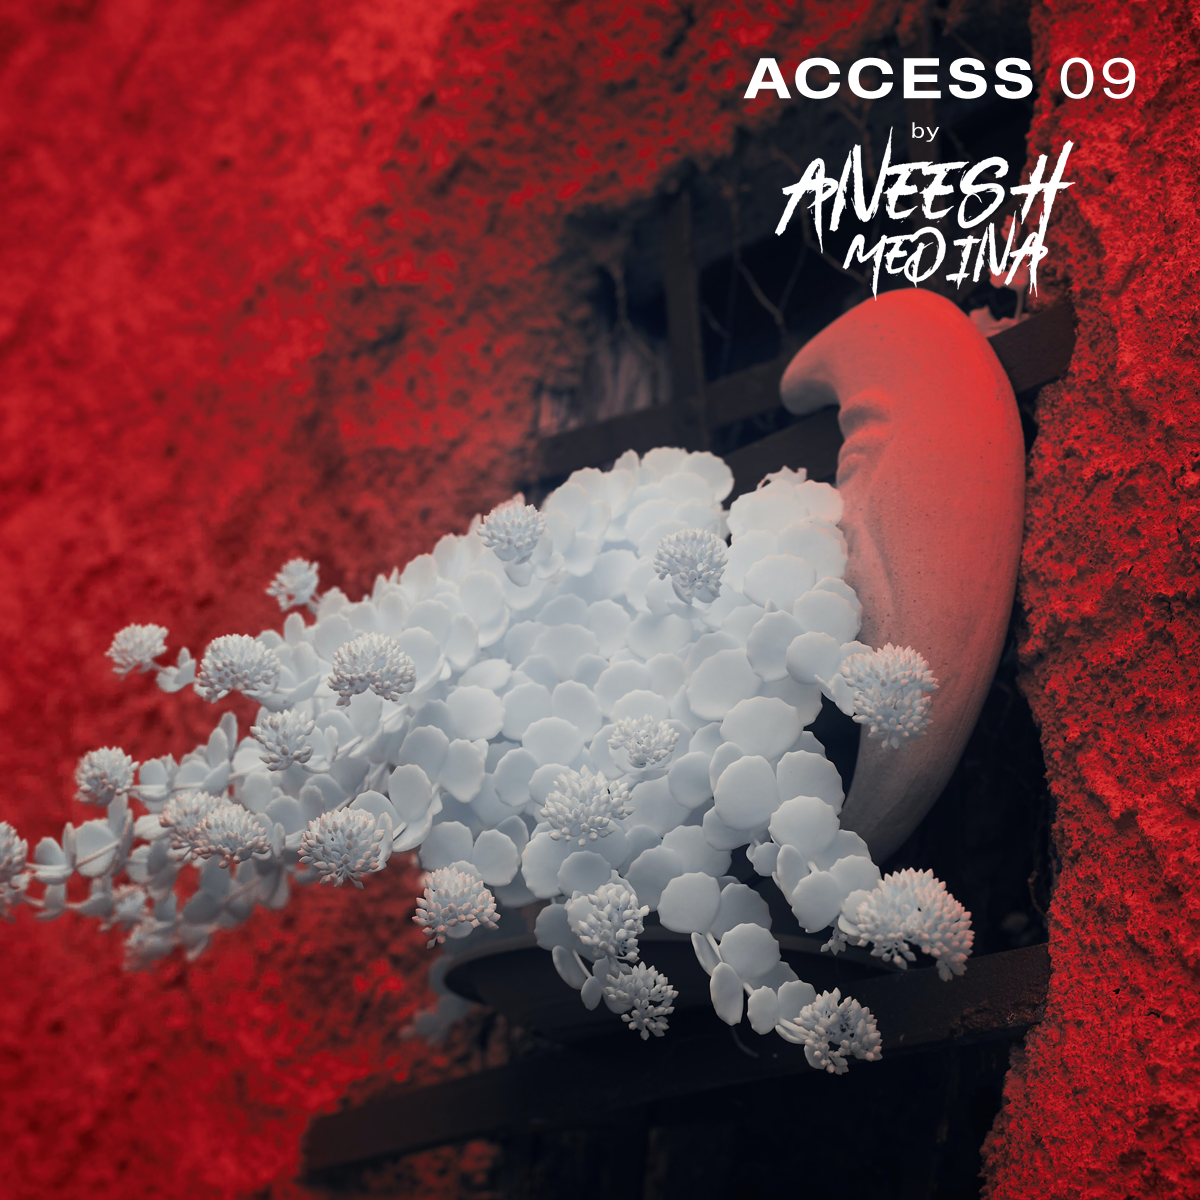 Access :: Episode aired on August 25, 2020, 9pm banner logo